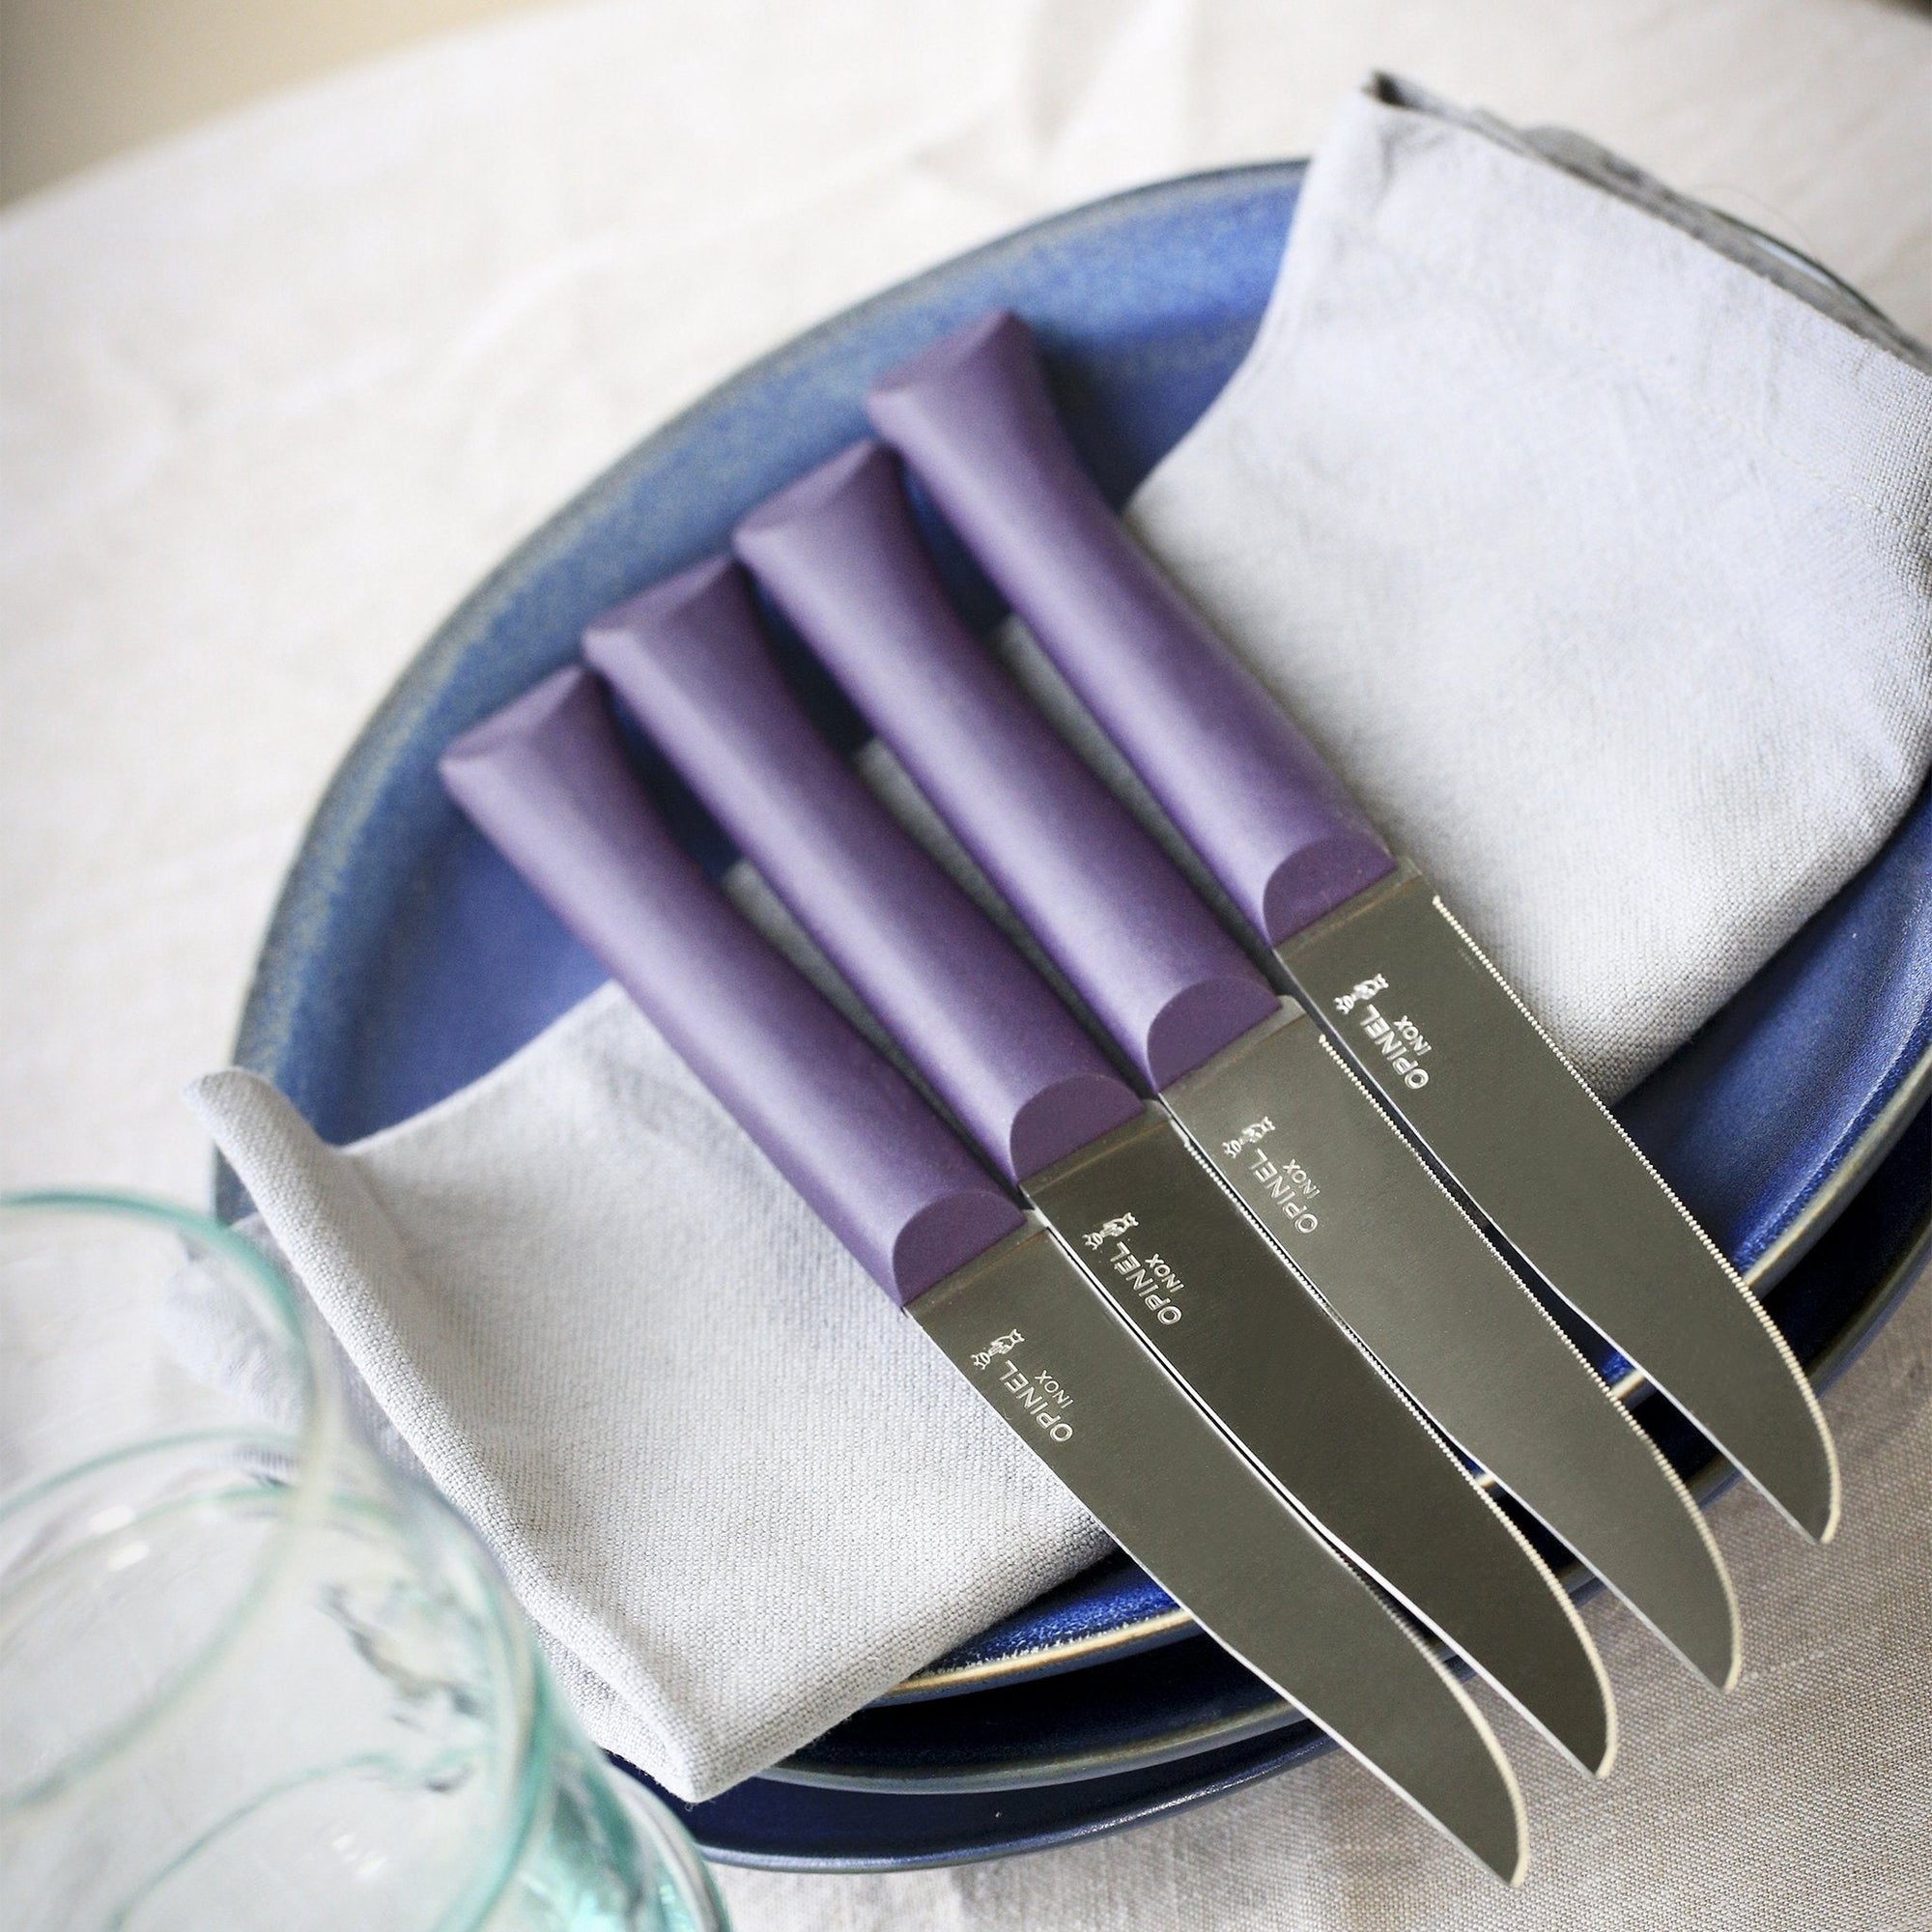 Set of 4 Opinel knives